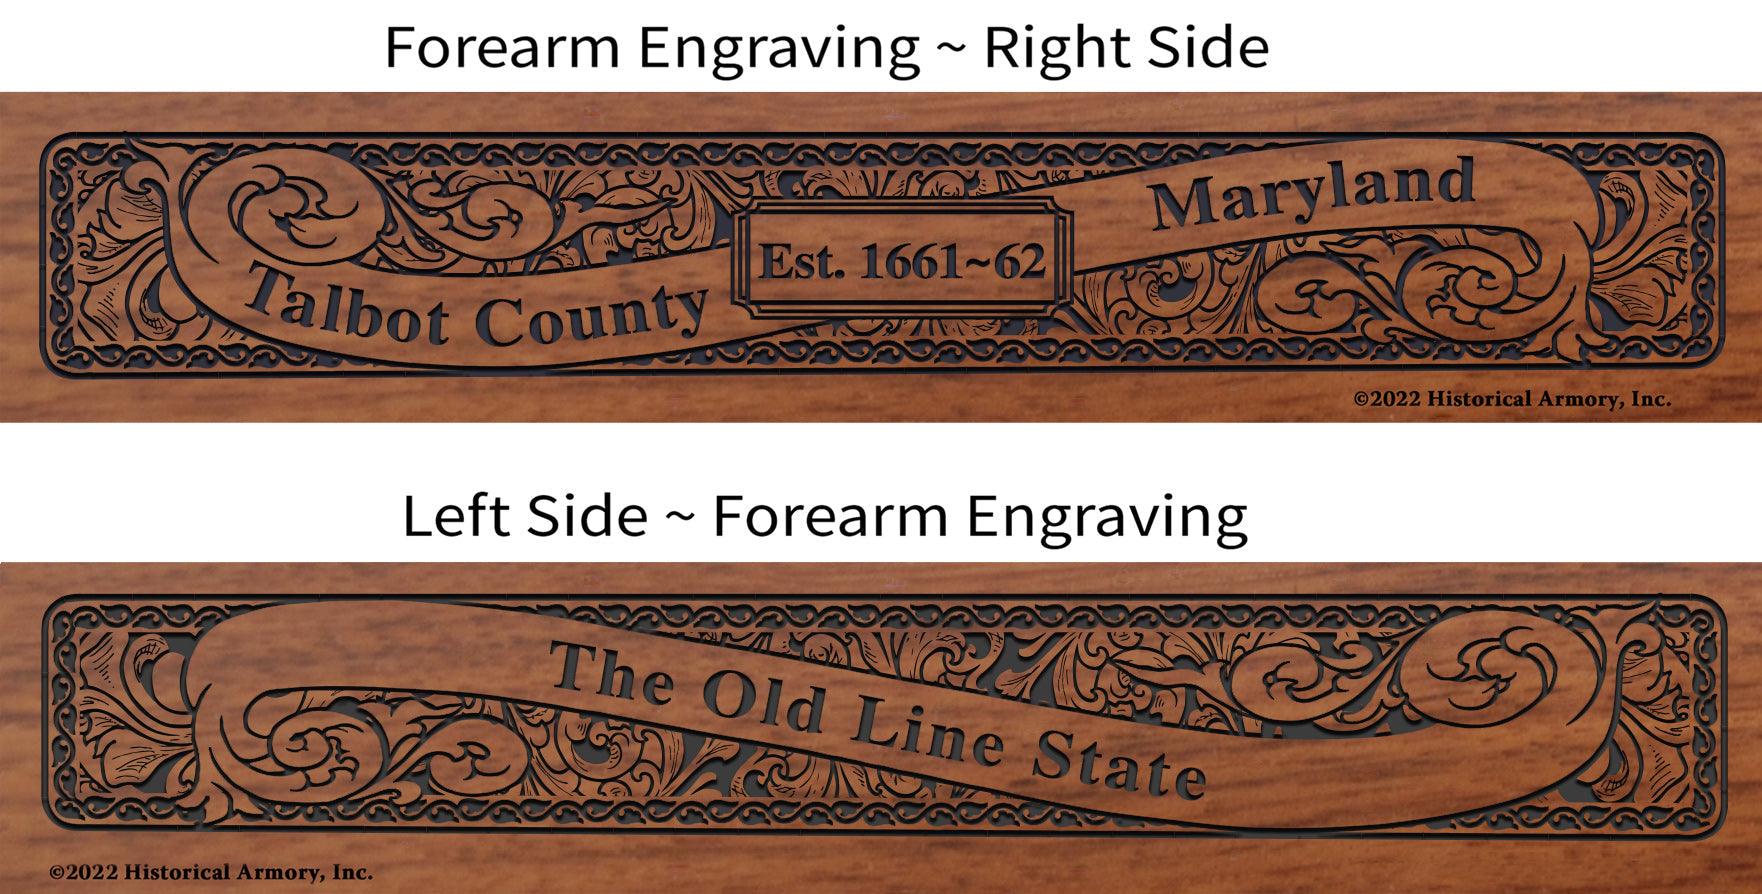 Talbot County Maryland Engraved Rifle Forearm